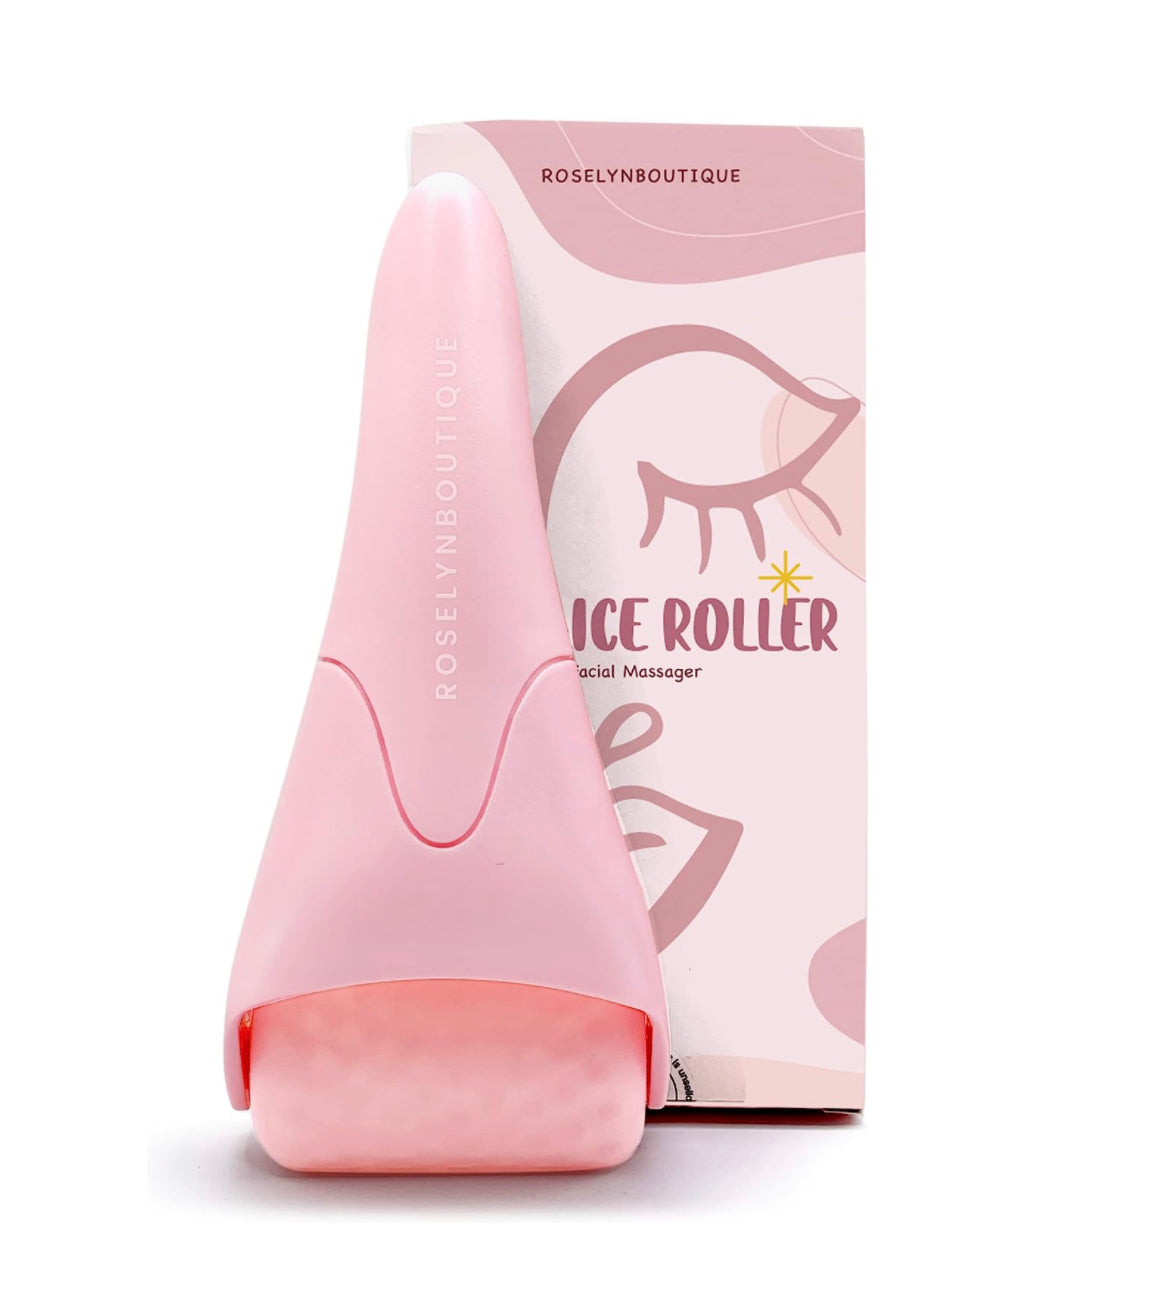 Roselyn Boutique Ice Roller